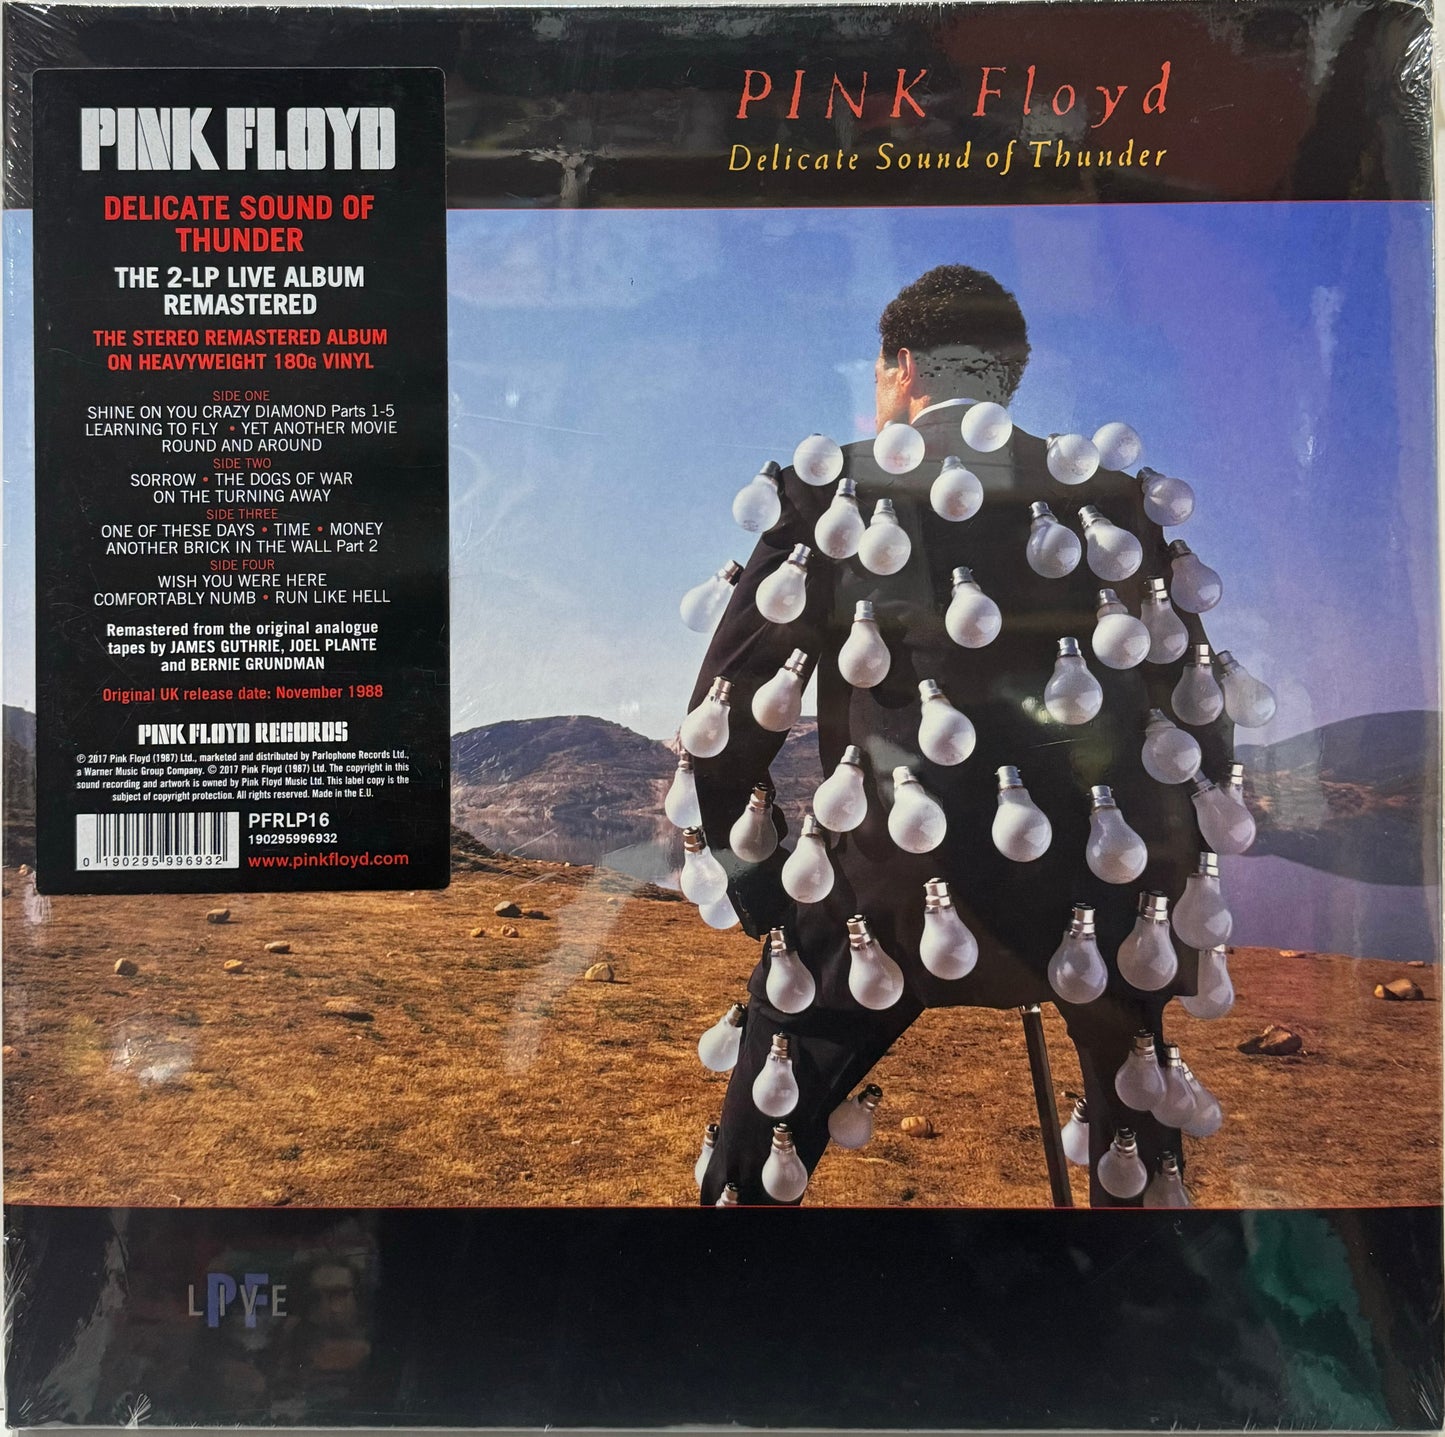 PINK FLOYD - DELICATE SOUND OF THUNDER  2 LPS